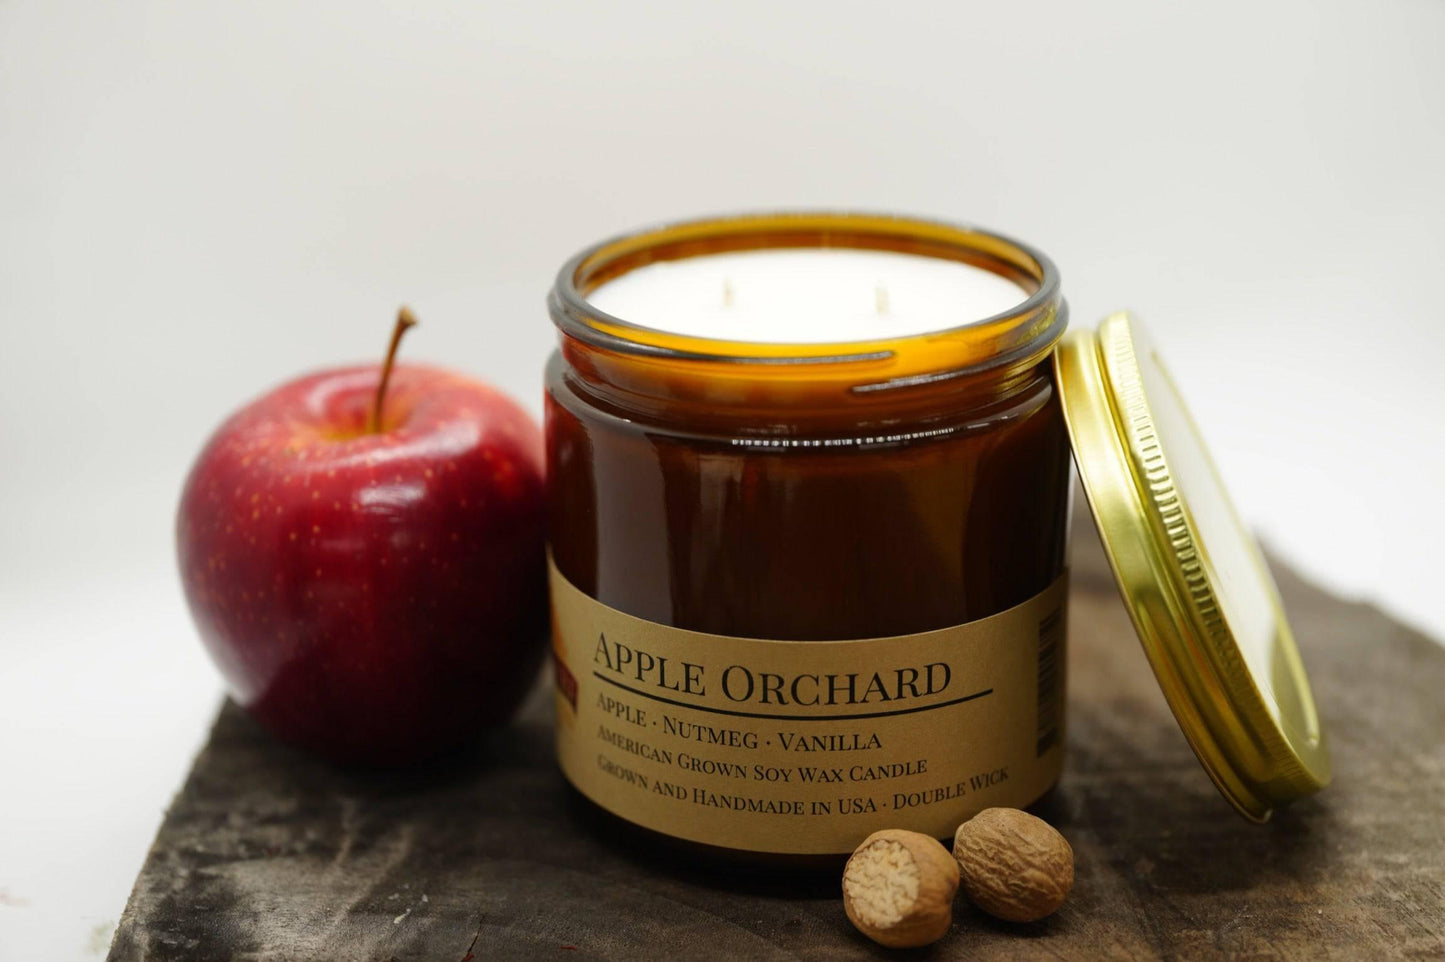 Apple Orchard Soy Wax Candle | 16 oz Double Wick Amber Apothecary Jar Candle - Prairie Fire Candles